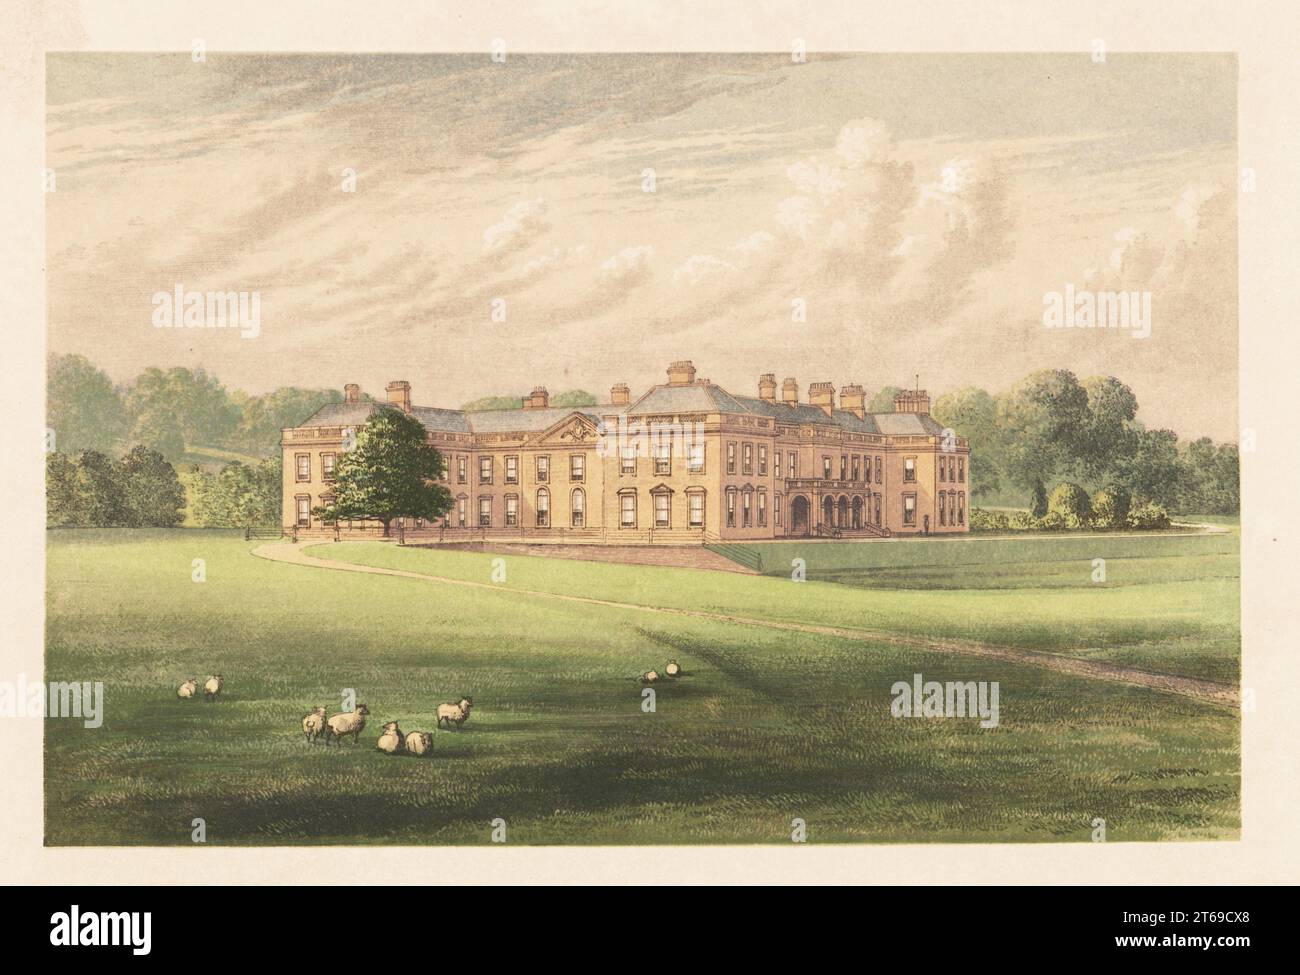 Holme Lacy House Herefordshire, England. Mansion built in the 16th century and remodeled in the 17th century by John, 2nd Viscount Scudamore. Home of Henry Scudamore-Stanhope, 9th Earl of Chesterfield. Colour woodblock by Benjamin Fawcett in the Baxter process of an illustration by Alexander Francis Lydon from Reverend Francis Orpen Morriss A Series of Picturesque Views of the Seats of Noblemen and Gentlemen of Great Britain and Ireland, William Mackenzie, London, 1880. Stock Photo